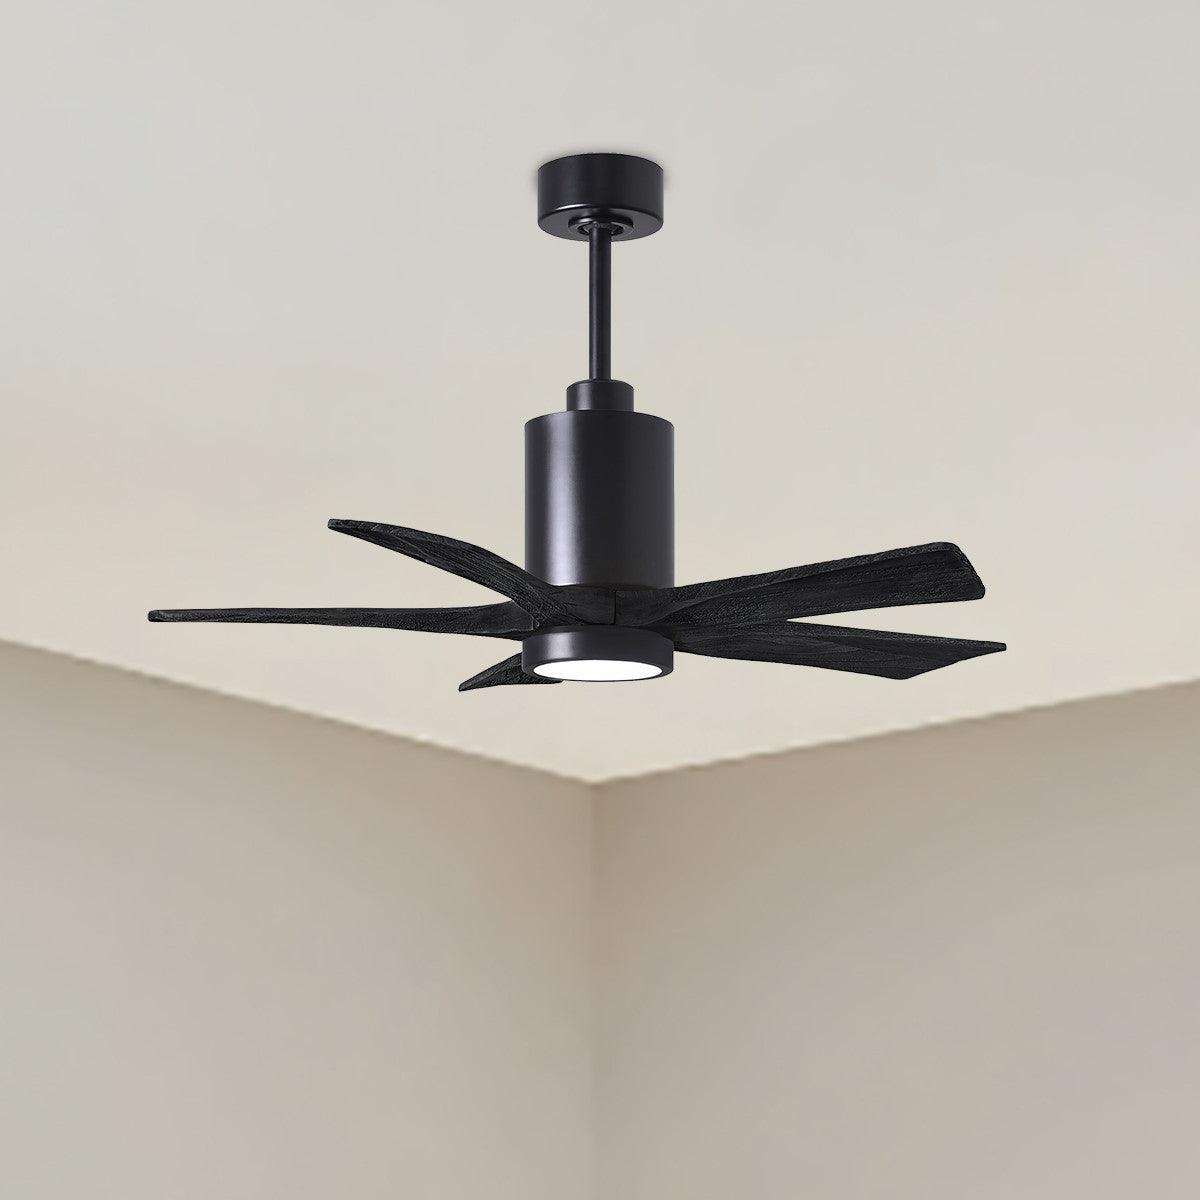 Patricia 42 Inch 5 Blades Modern Outdoor Ceiling Fan With Light, Wall And Remote Control Included